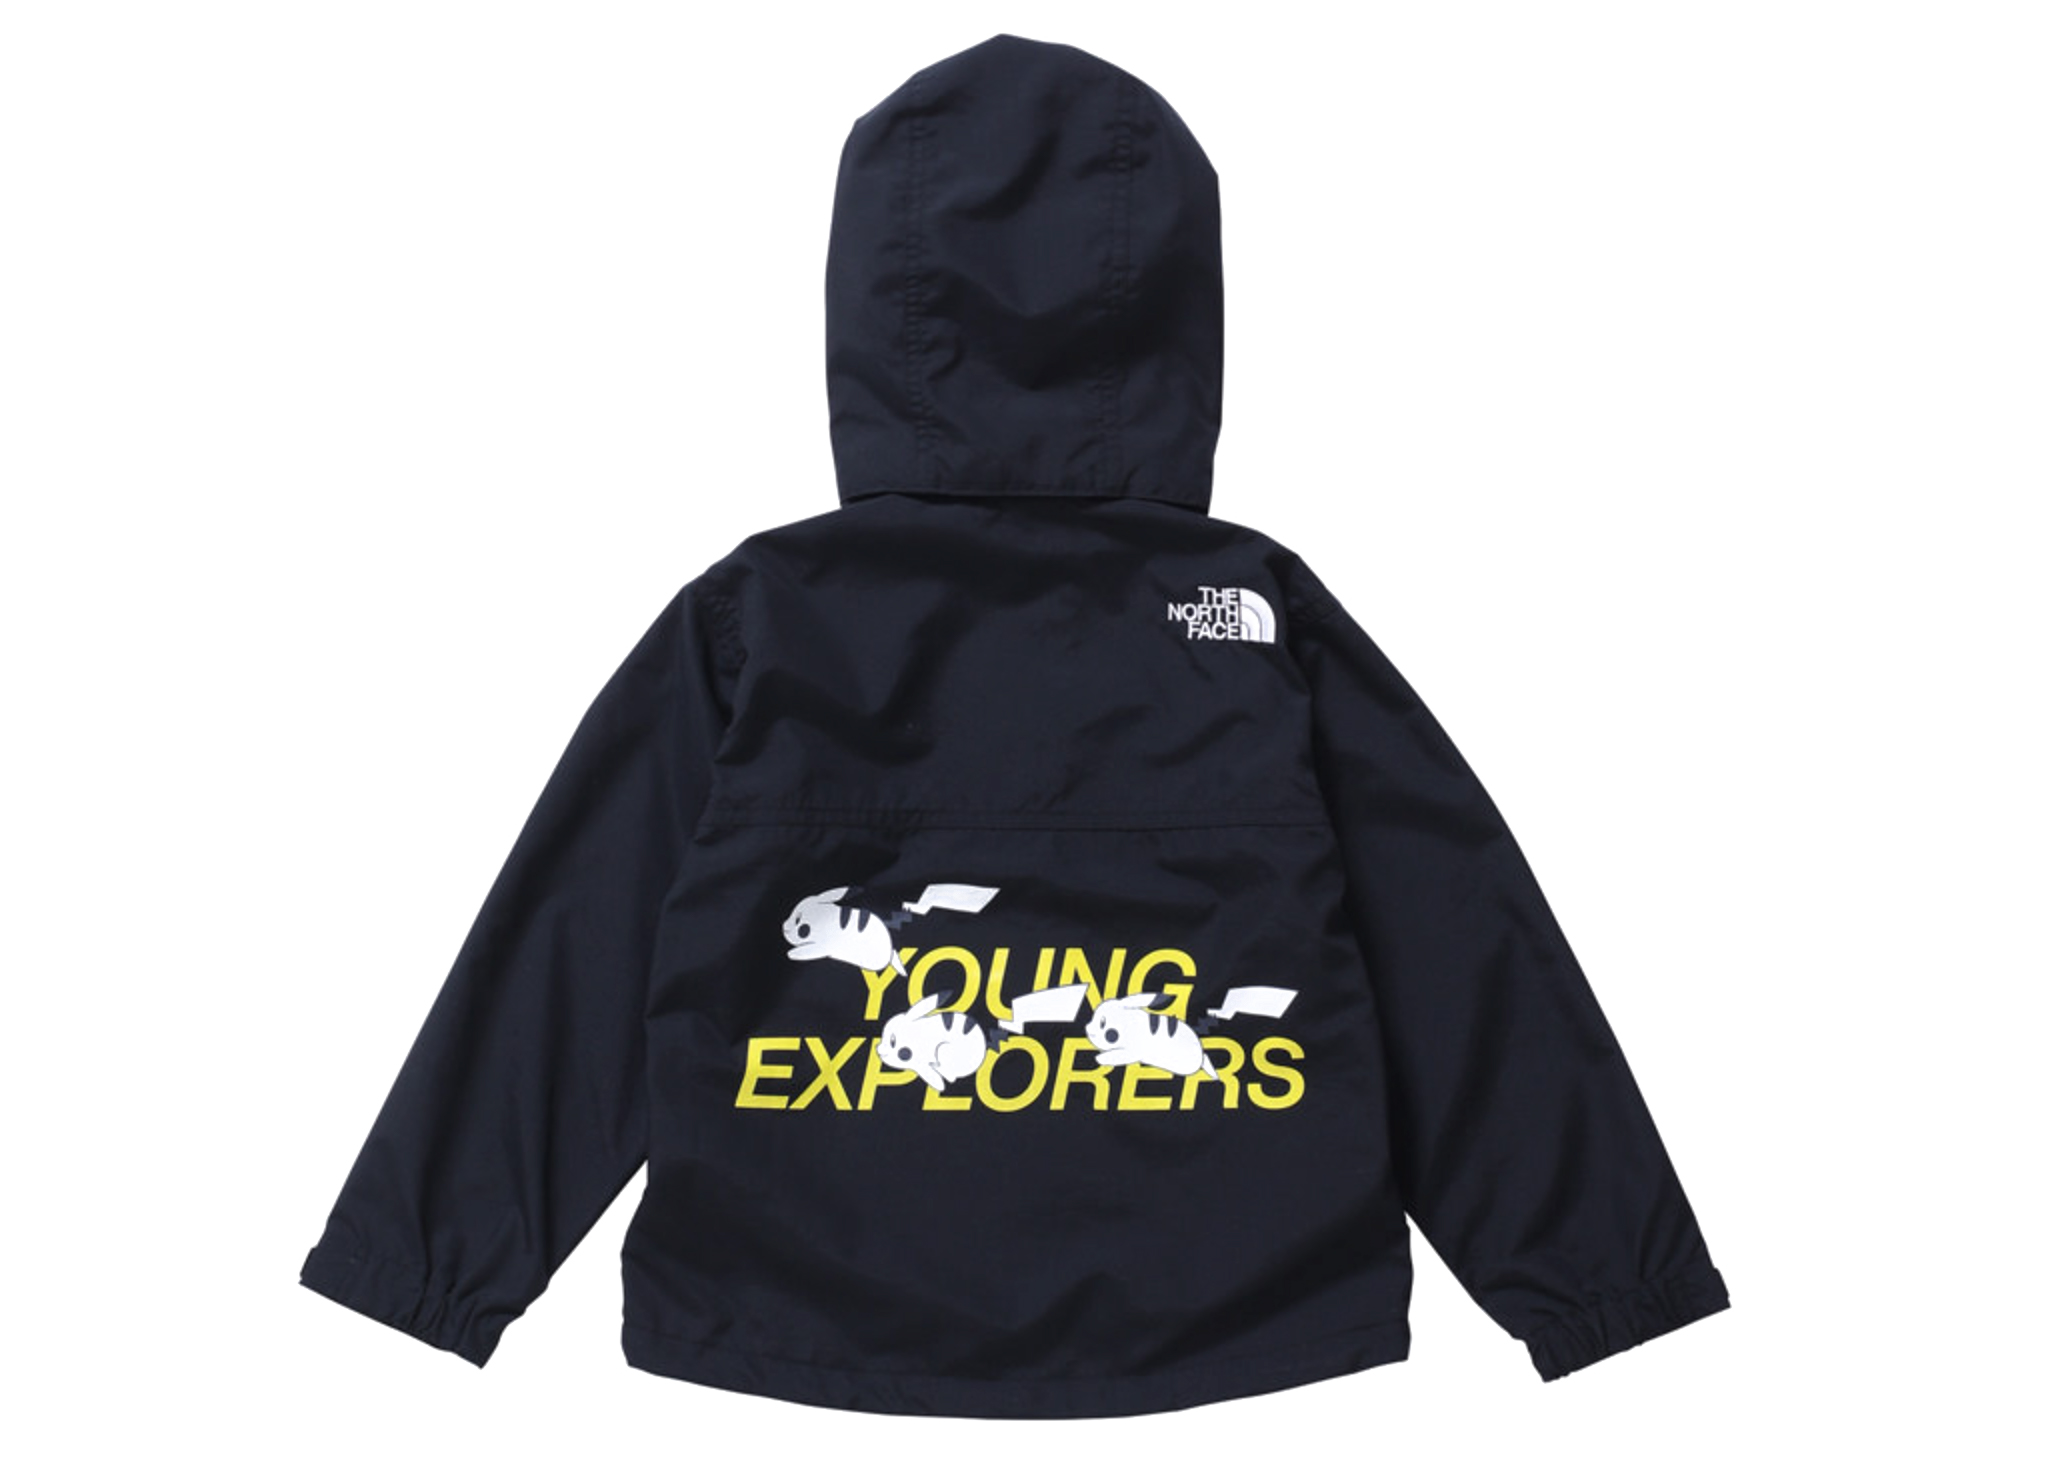 The North Face x Pokemon Young Explorers Kids Jacket Black Kids 